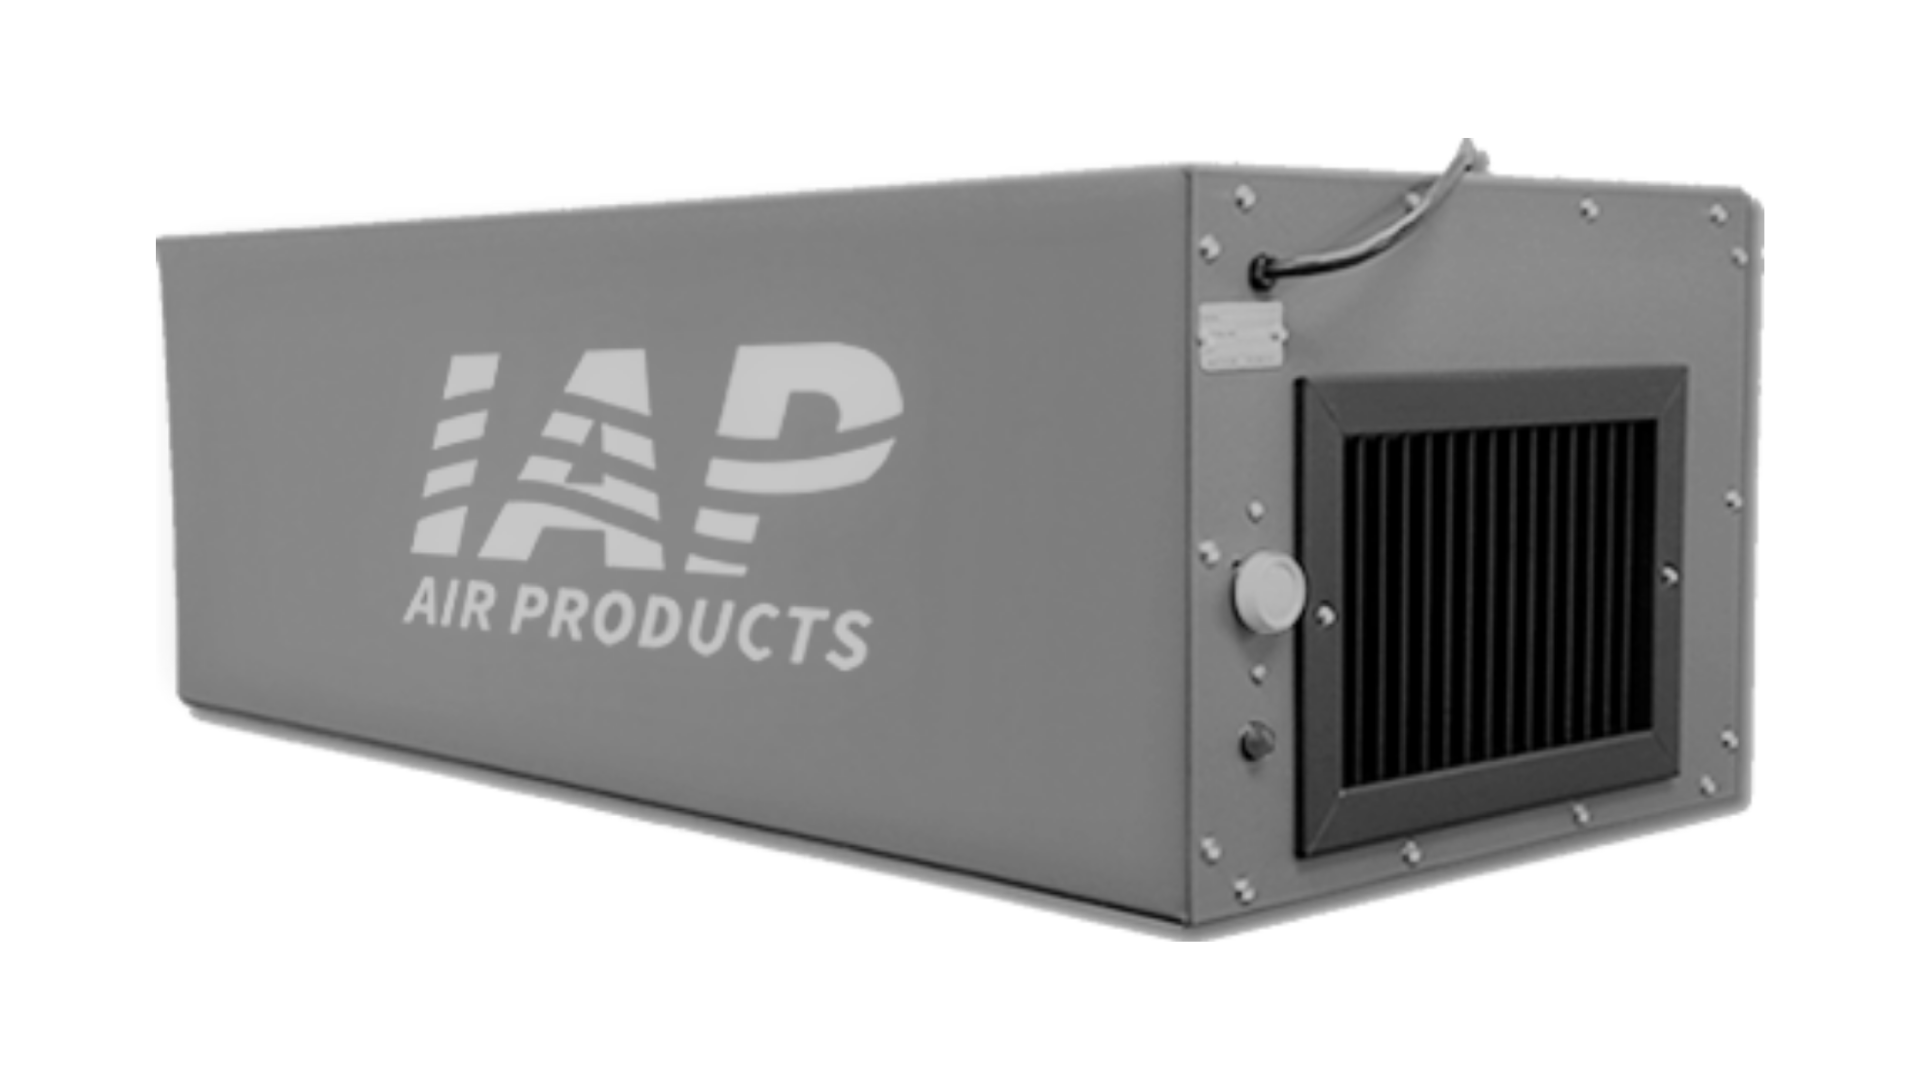 ambient air cleaners IAP